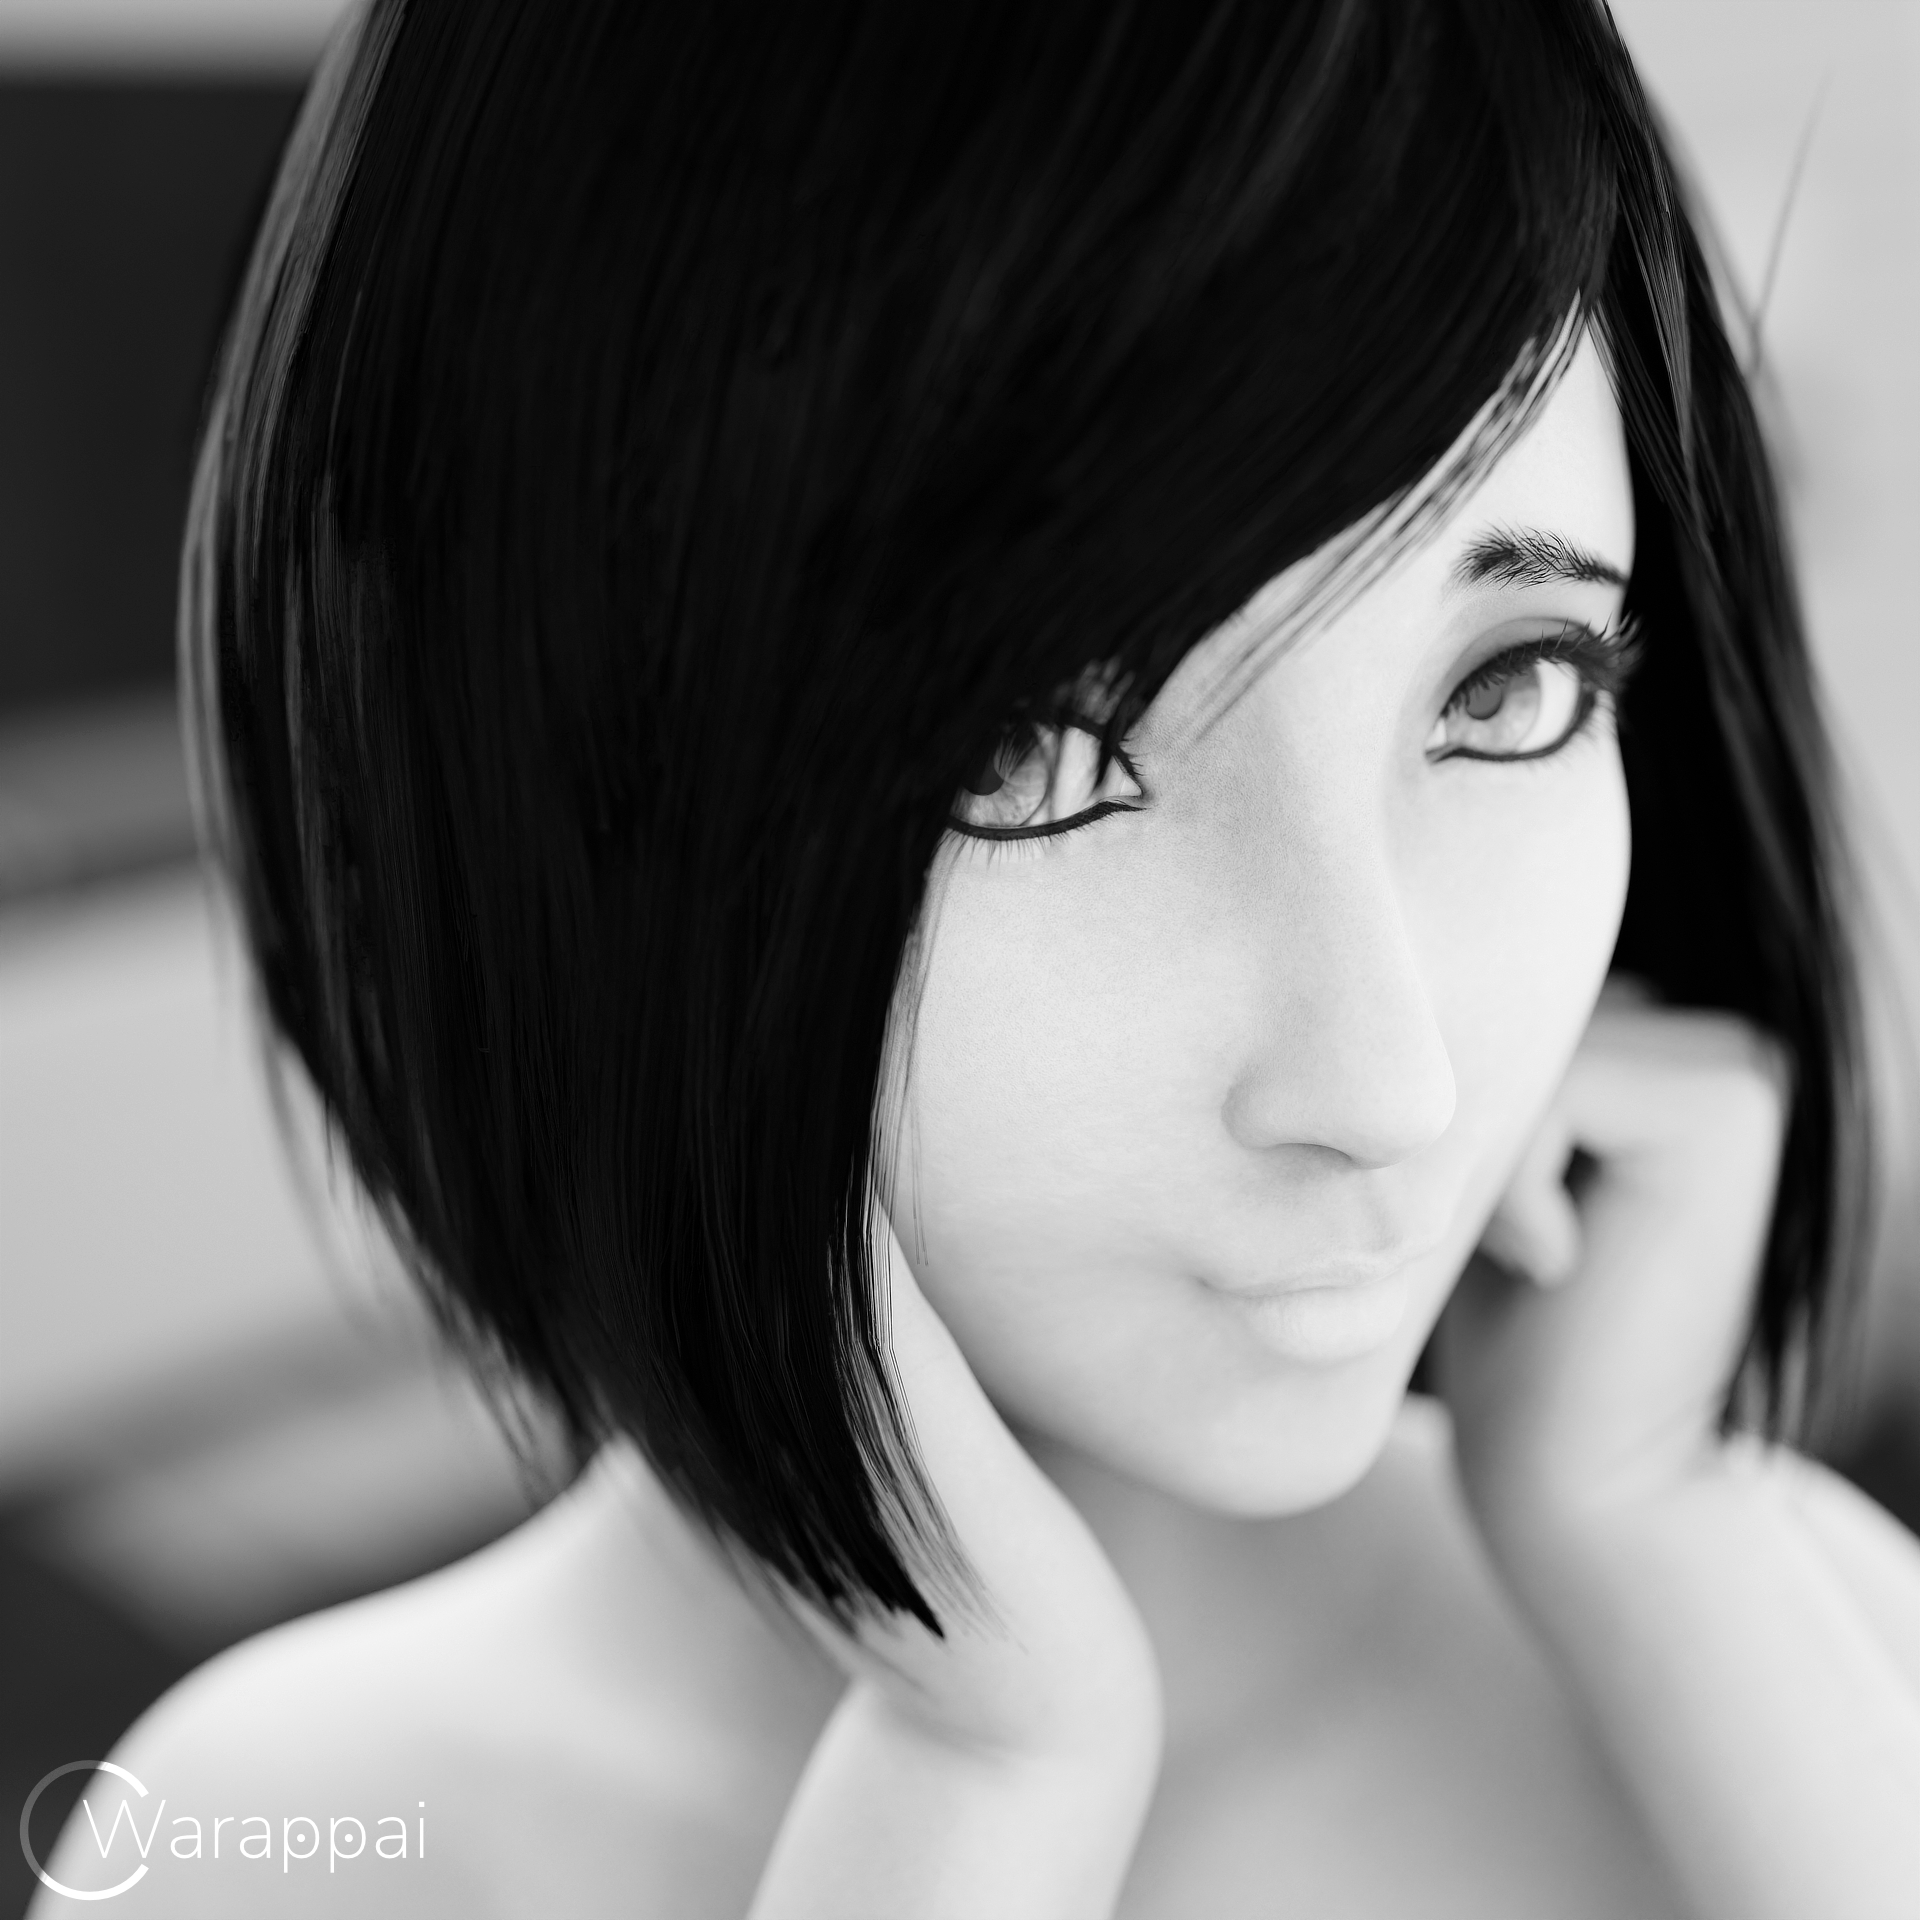 Tifa being cute with her face (BW = black and white version)